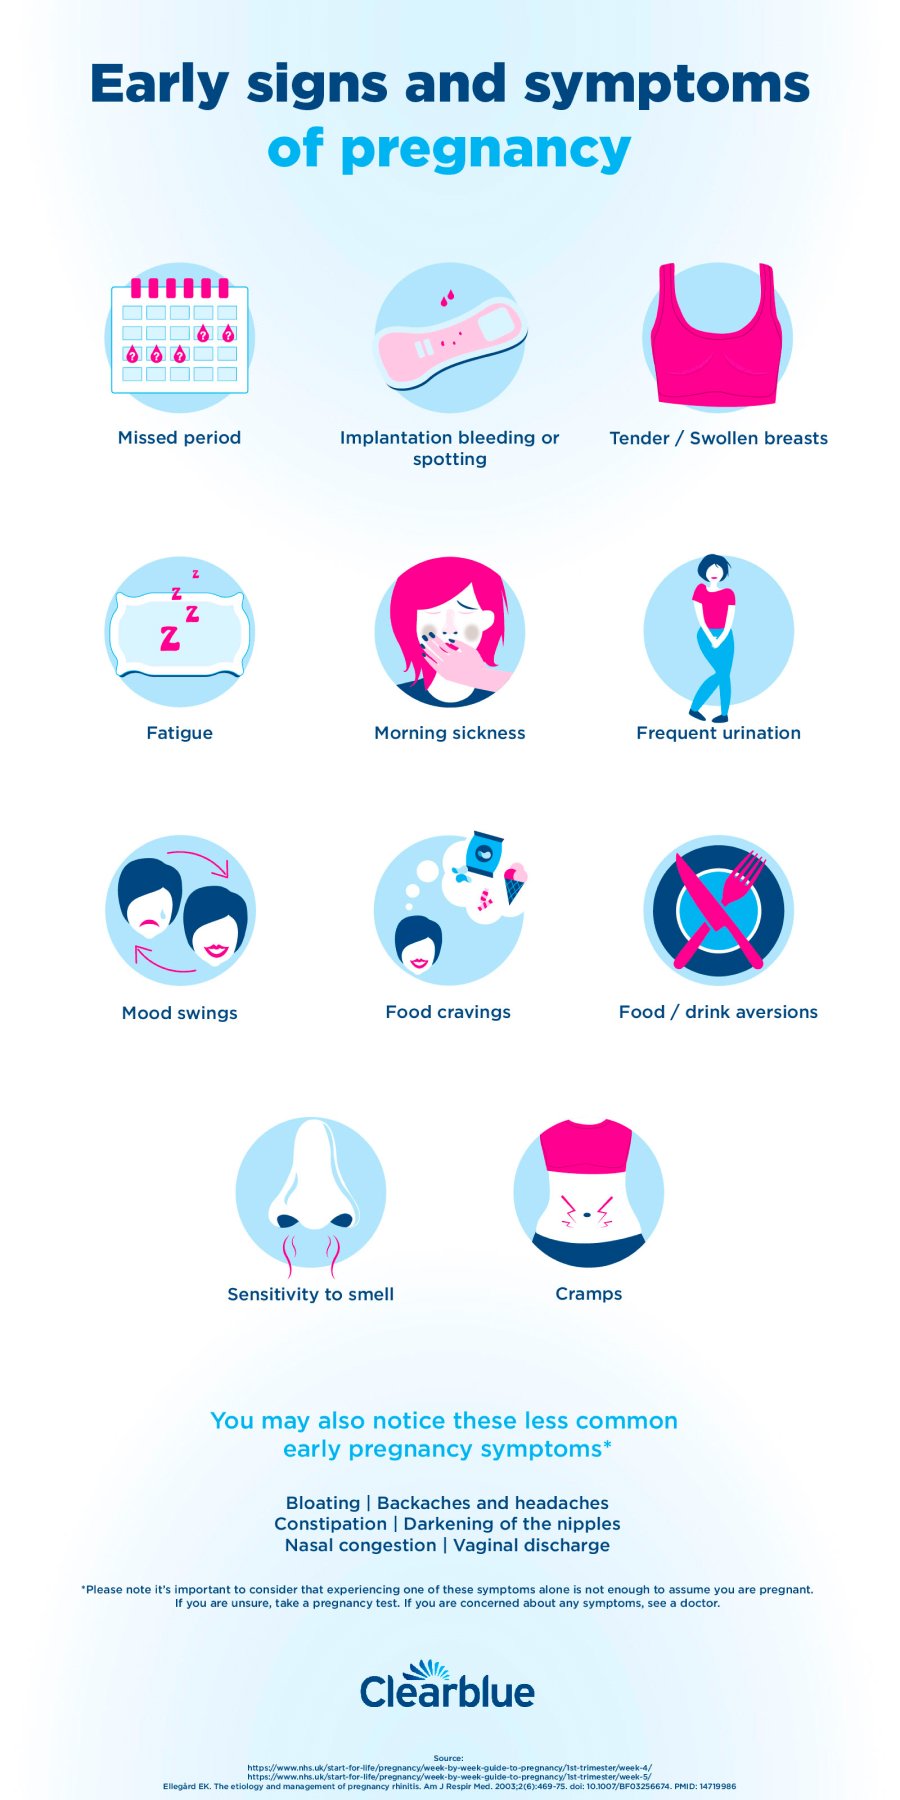 https://uk.clearblue.com/sites/default/files/wysiwyg/pages/pregnant/clearblue-early-pregnancy-symptoms-infographics.jpg